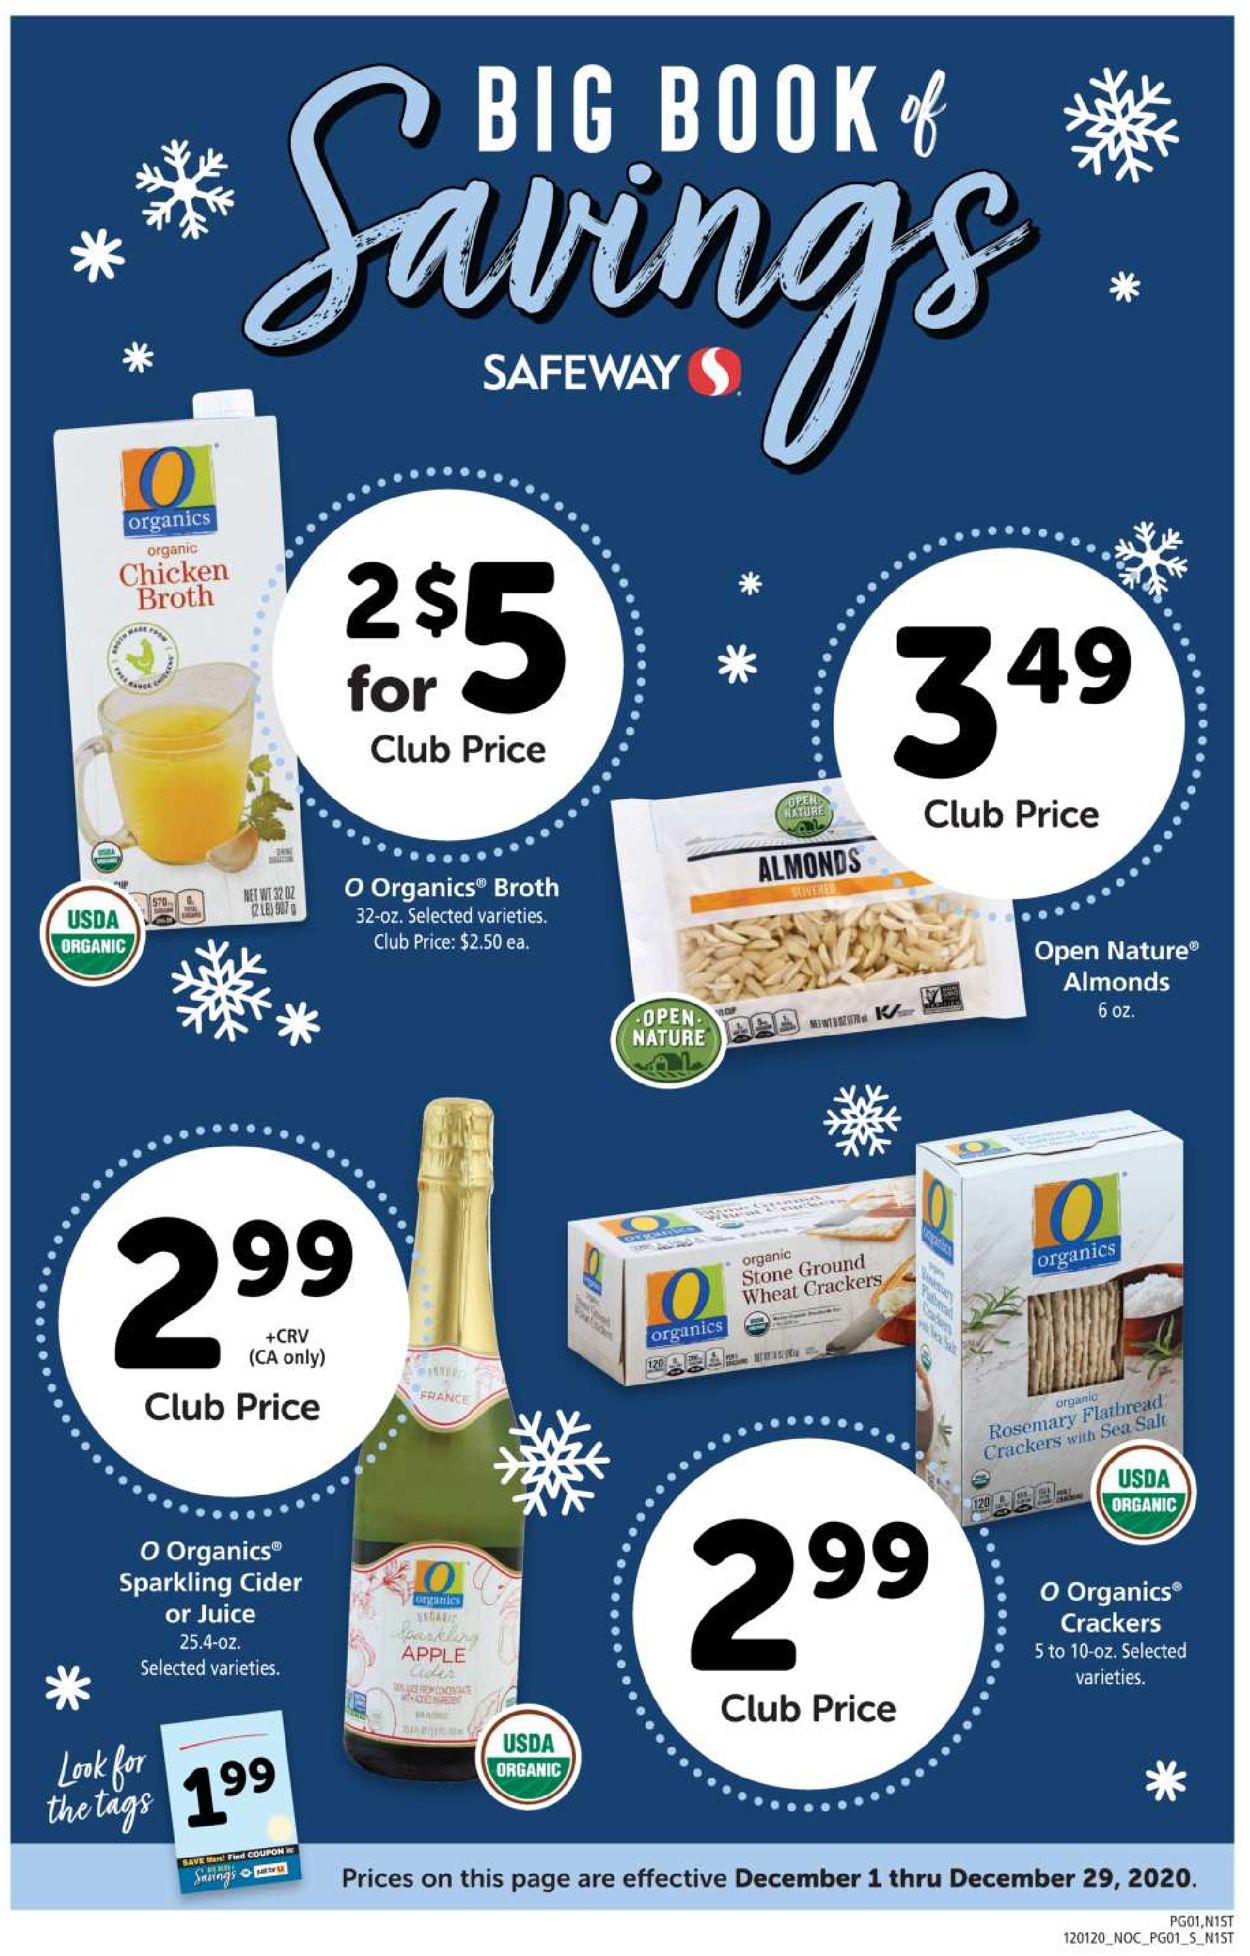 Safeway Christmas 2020 Current weekly ad 12/01 12/29/2020 frequent